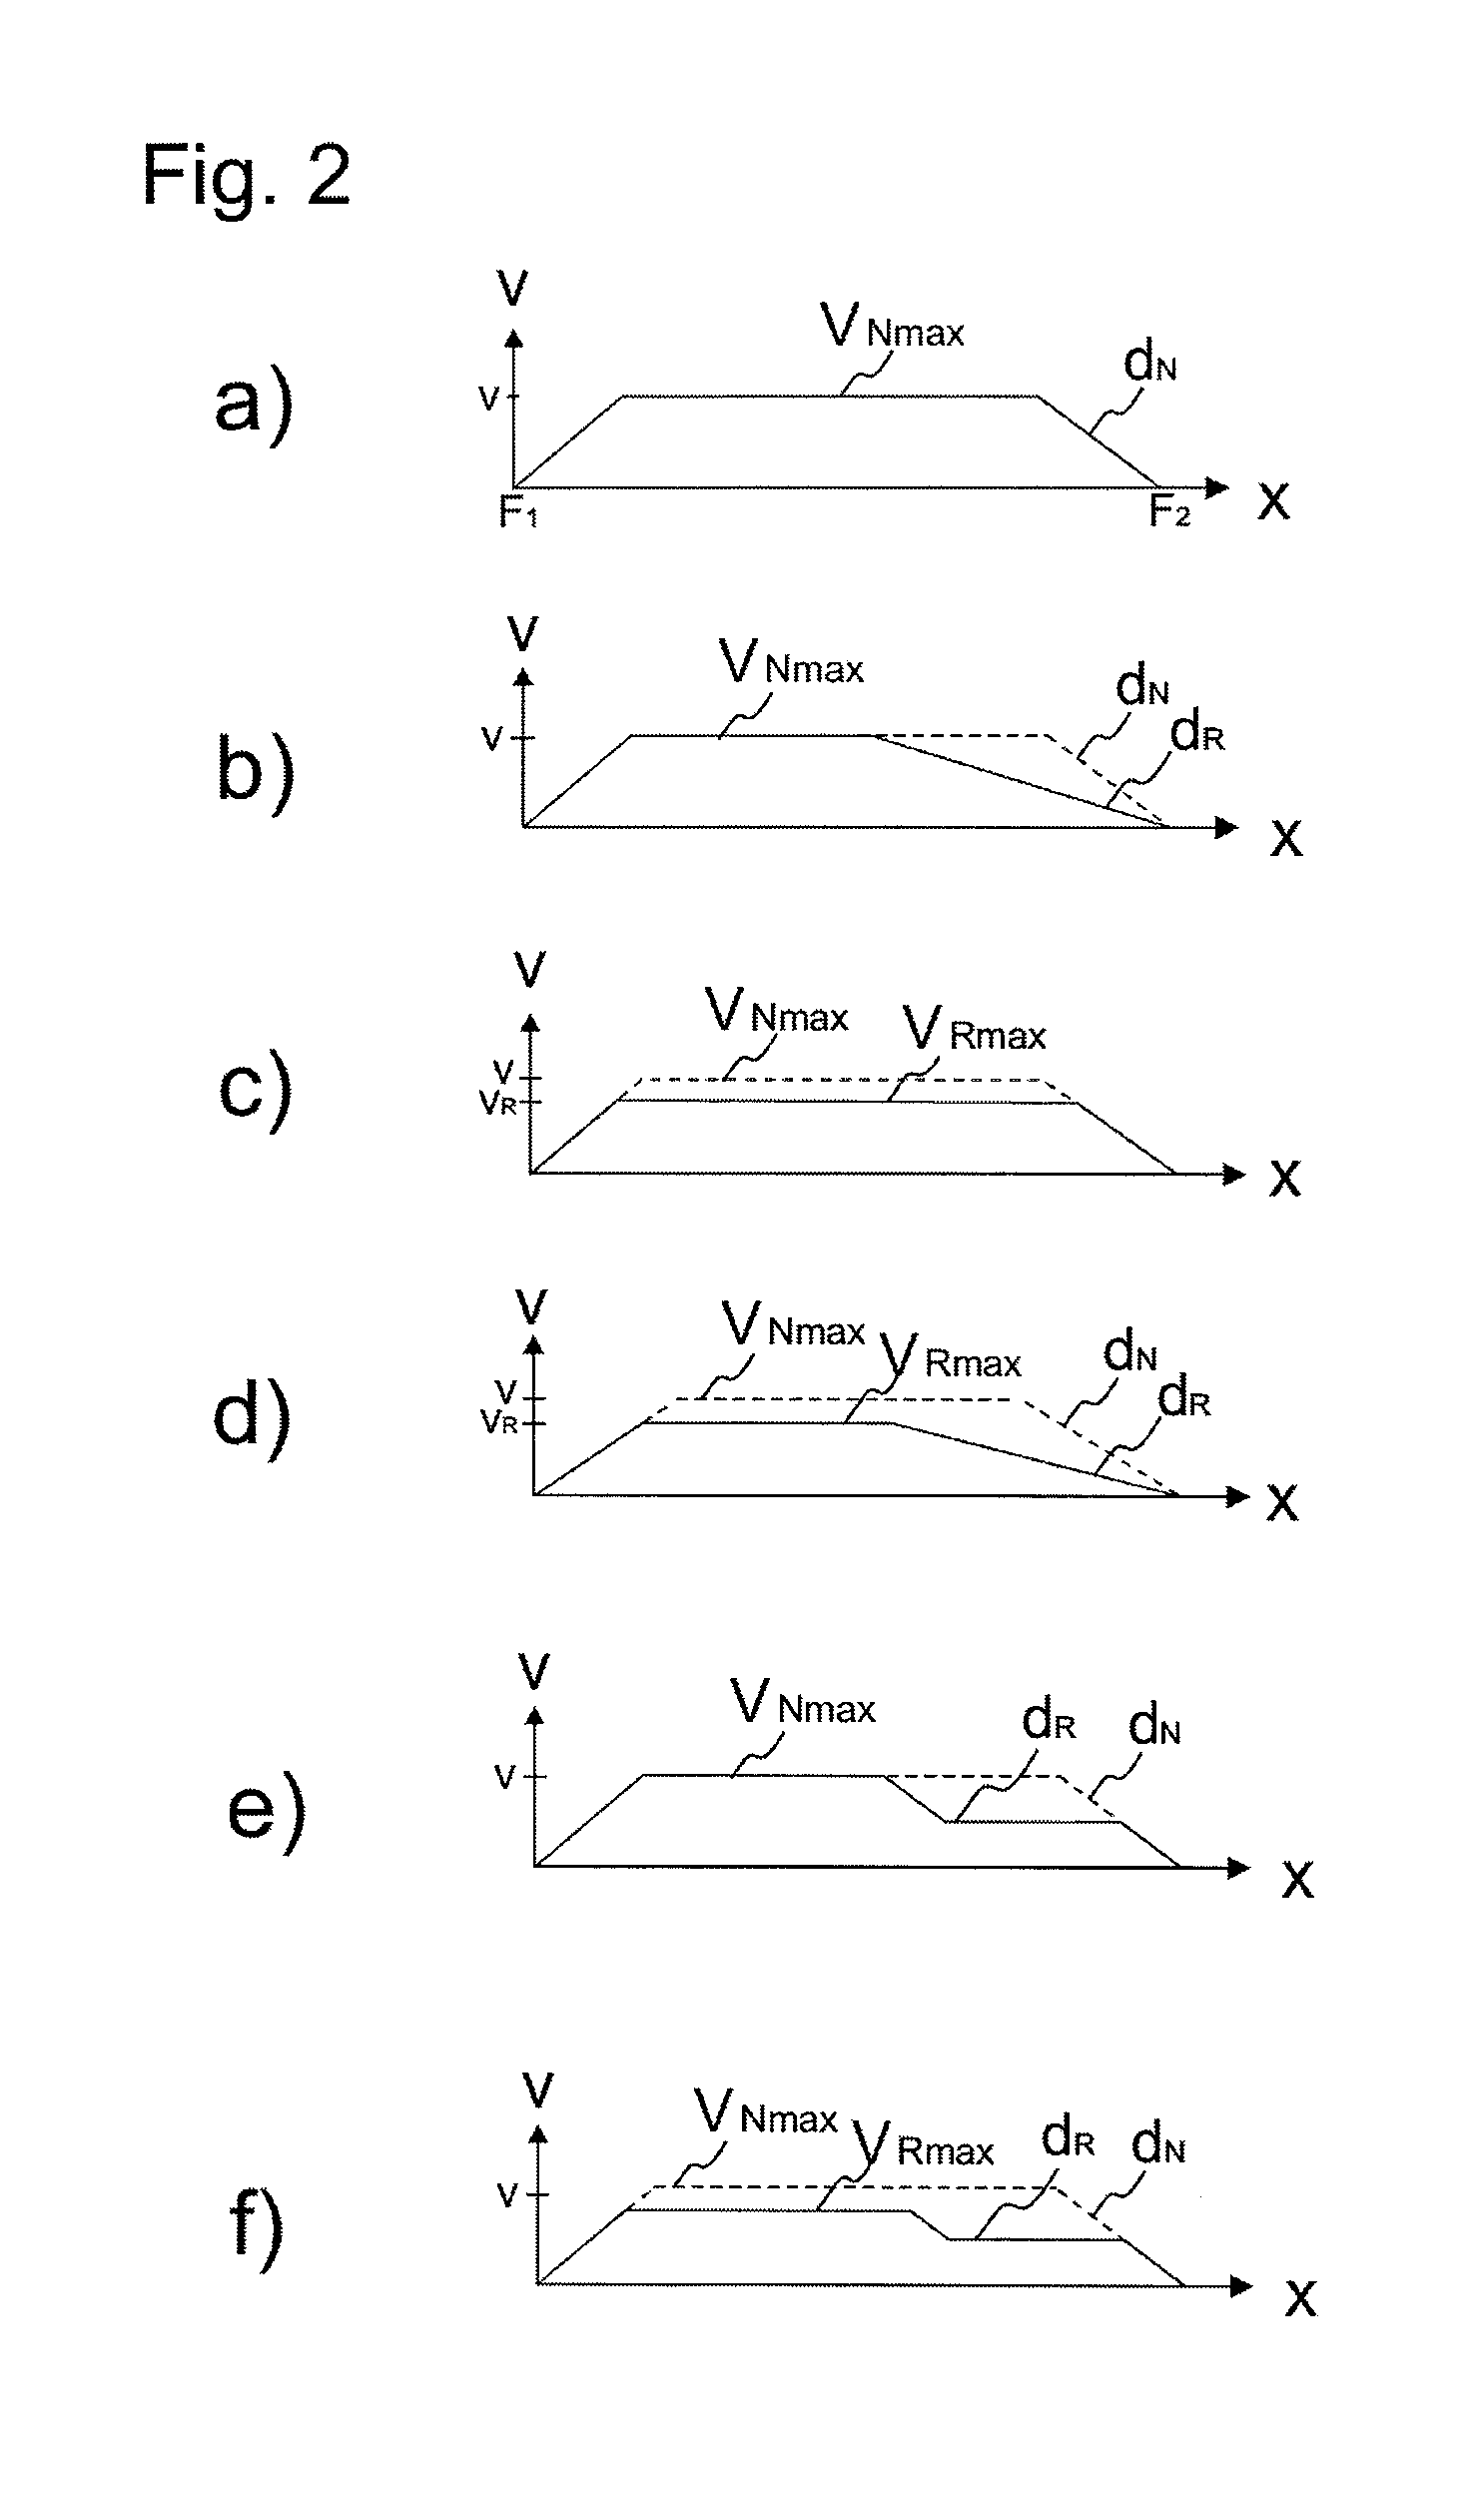 Method for controlling an elevator, and an elevator using starting position data of the elevator and sway data of the building